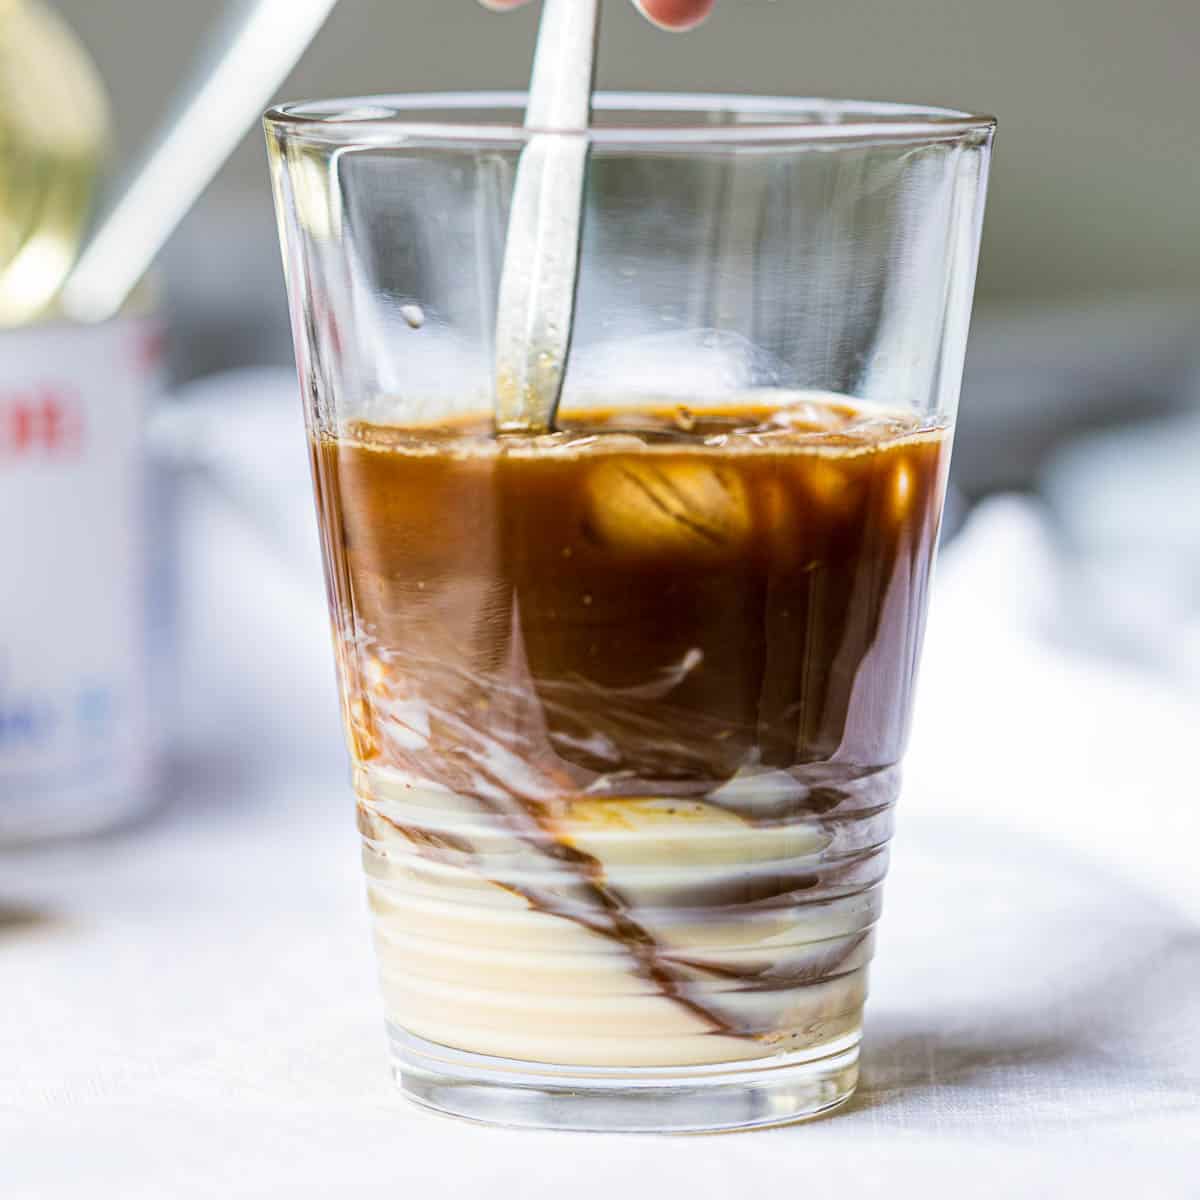 Swirling Vietnamese coffee with condensed milk in a glass.